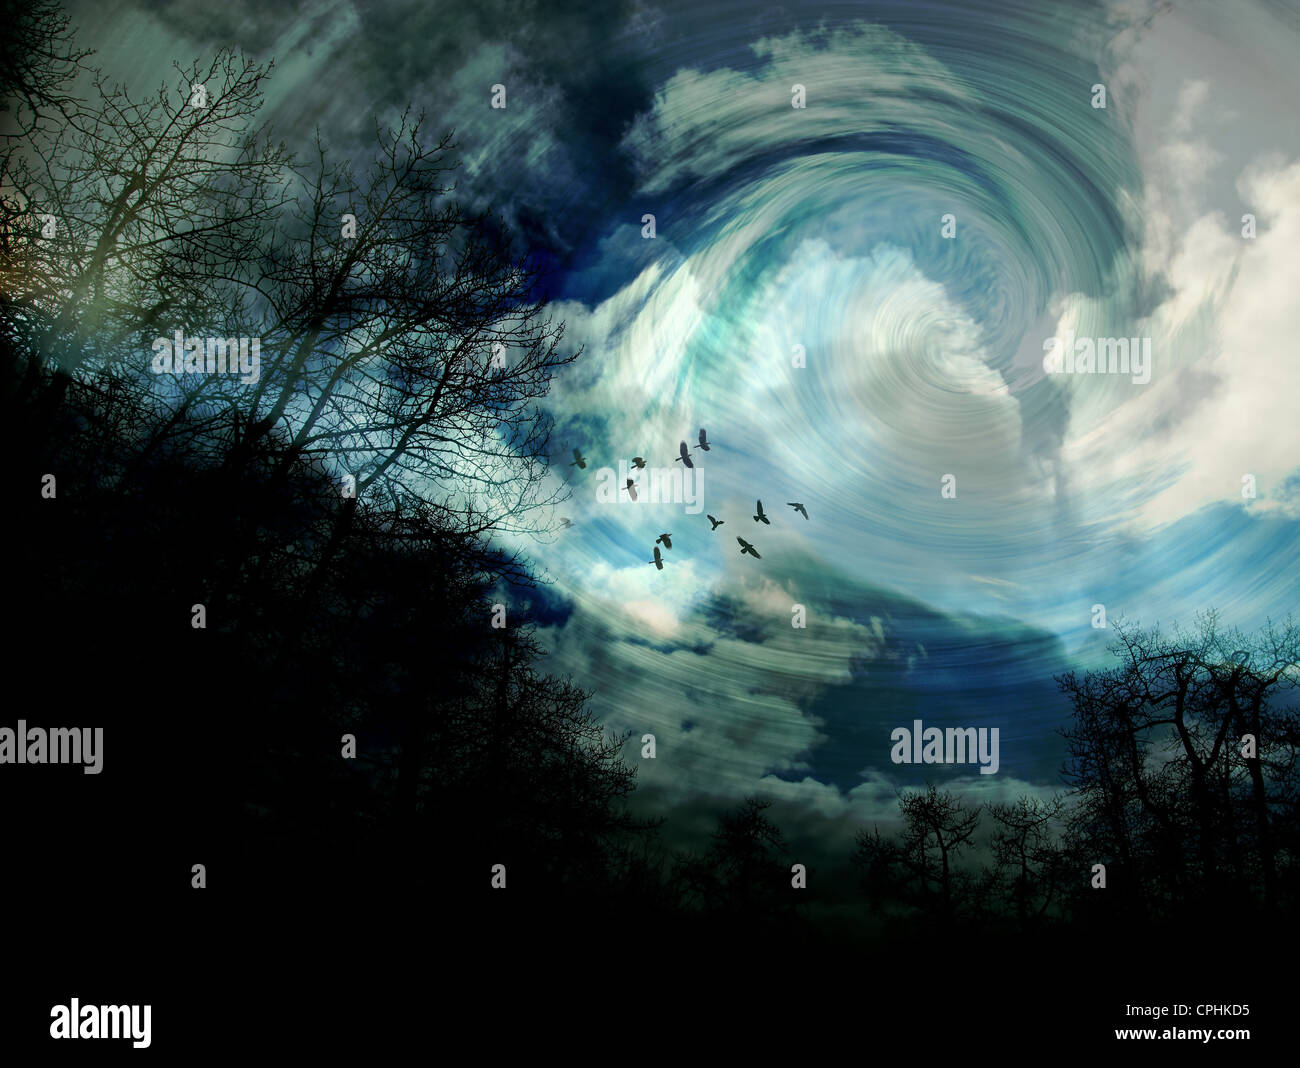 Surrealistic scene with trees, birds, and swirling clouds Stock Photo